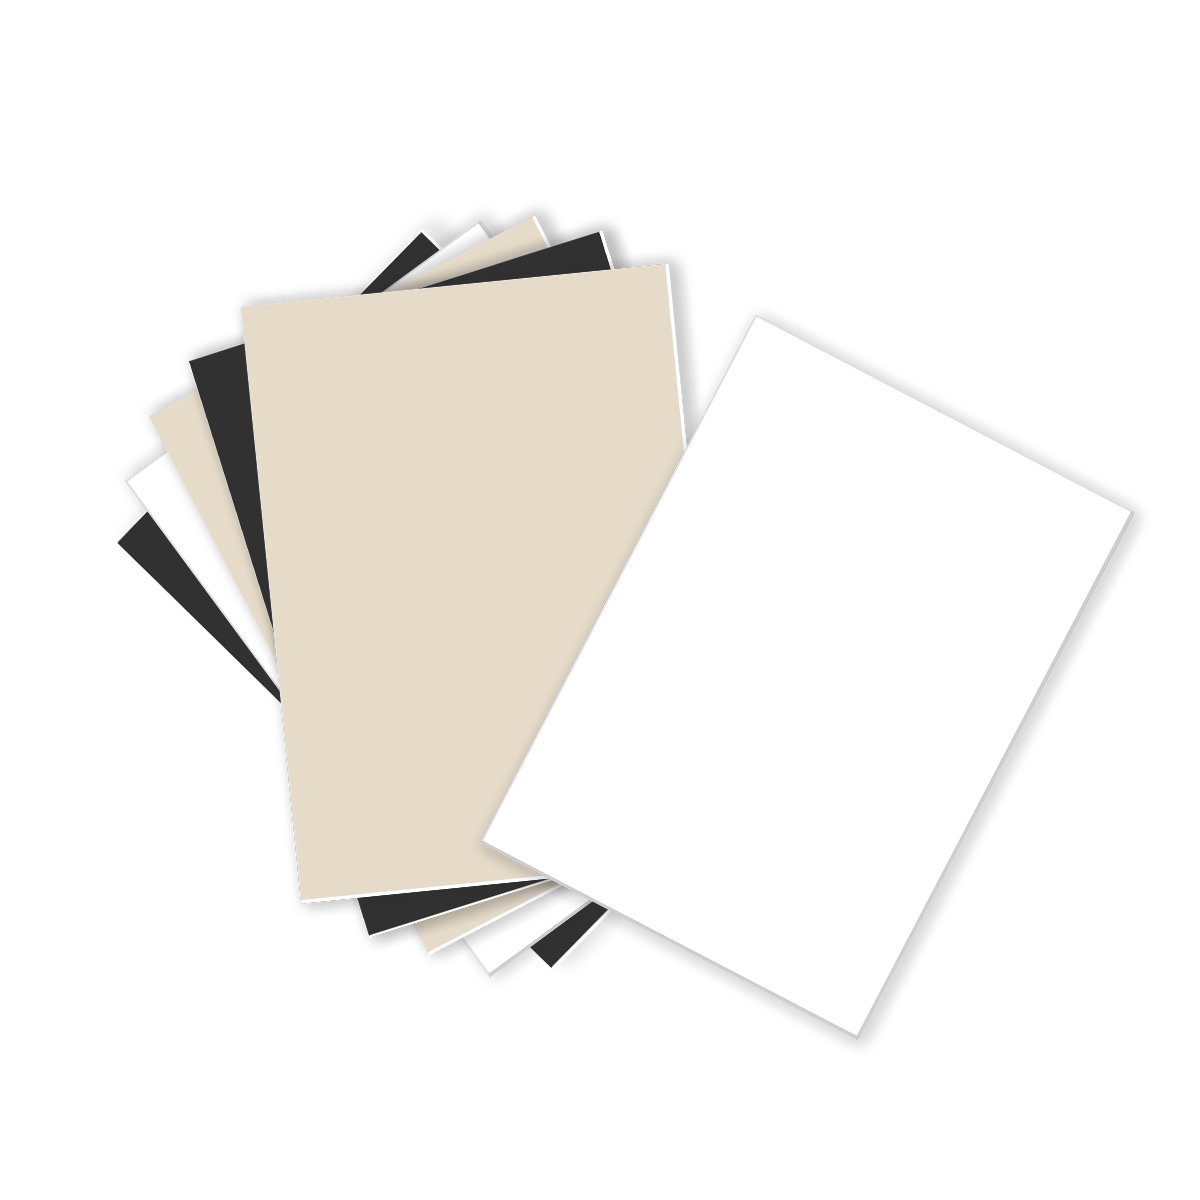 5x7" Backing/ Mounting Board 1.4mm Thick High Quality Conservation Card 